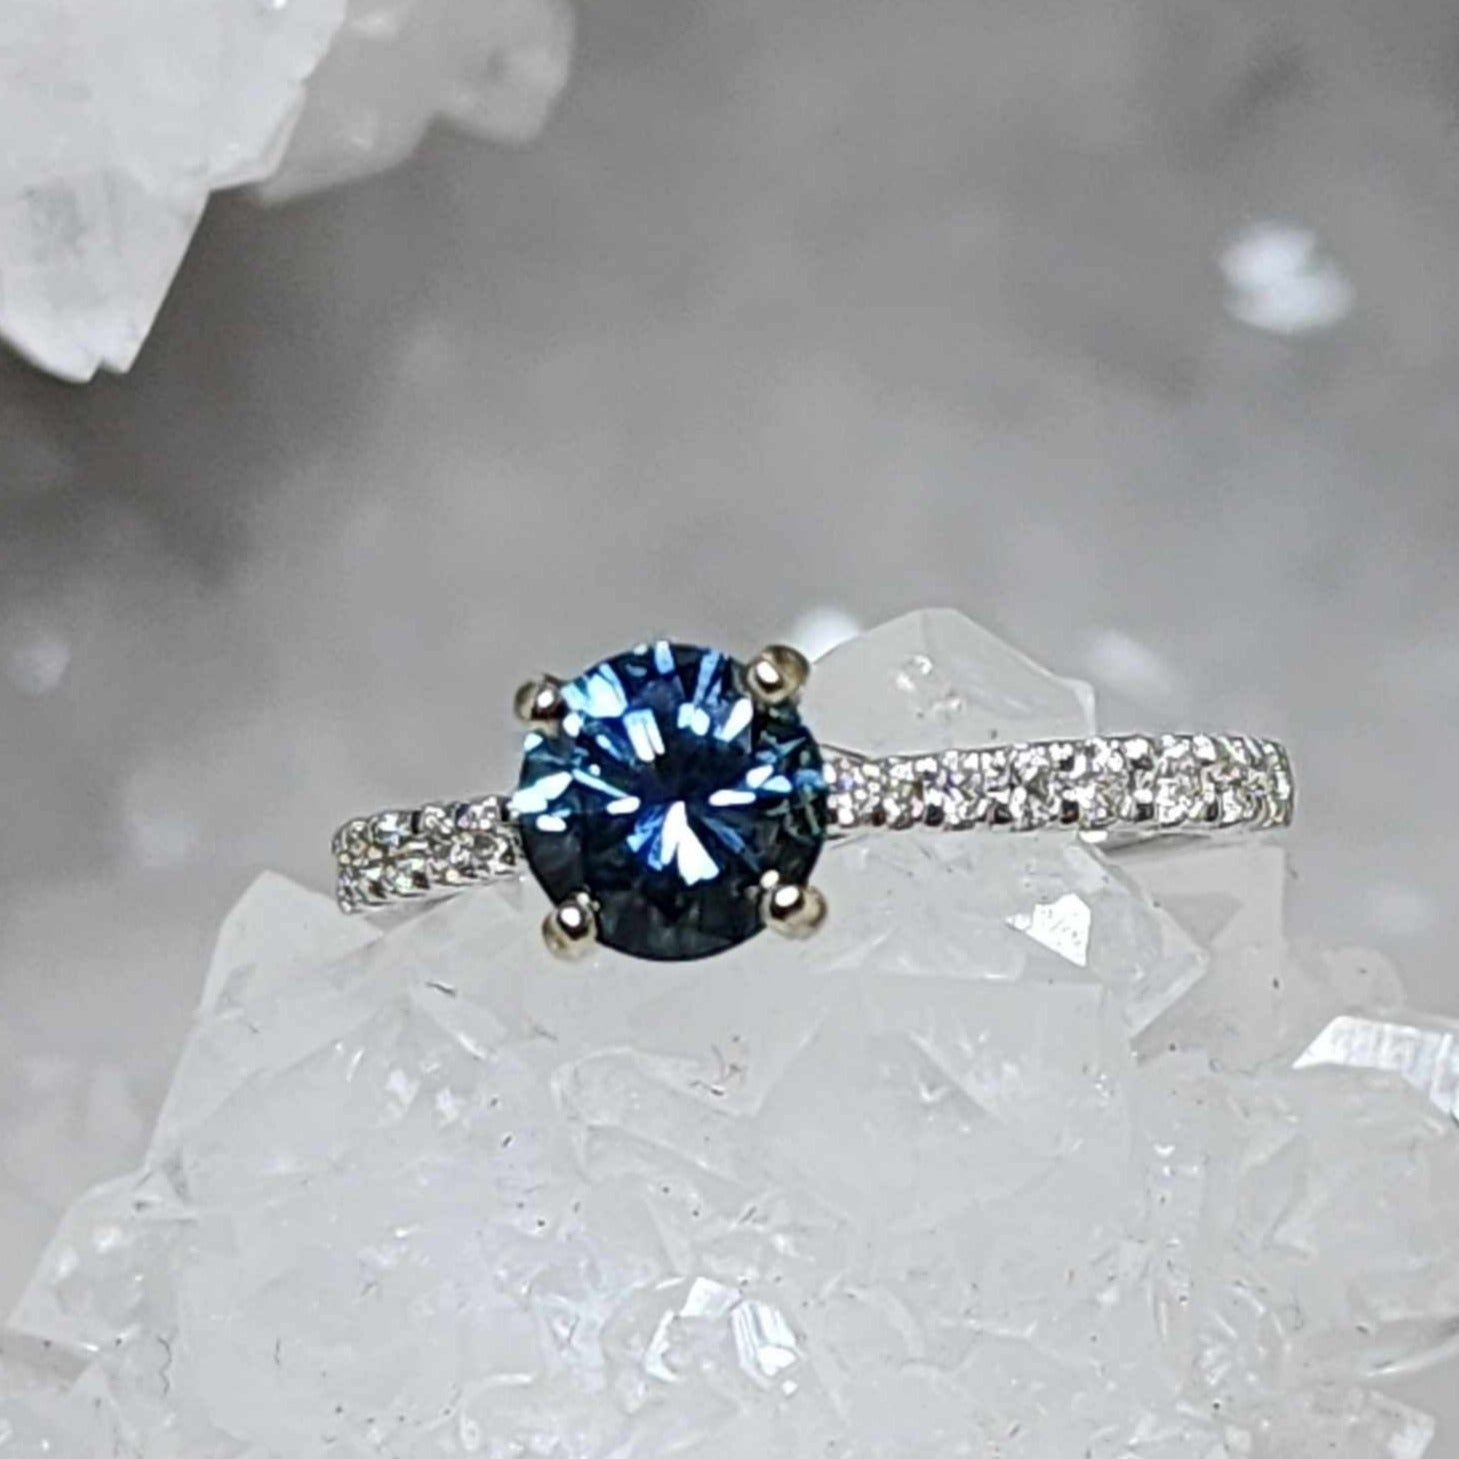 Ring - .98 CT Montana Sapphire Teal Blue Green Round Cut set in our 14K White Gold Mina Setting